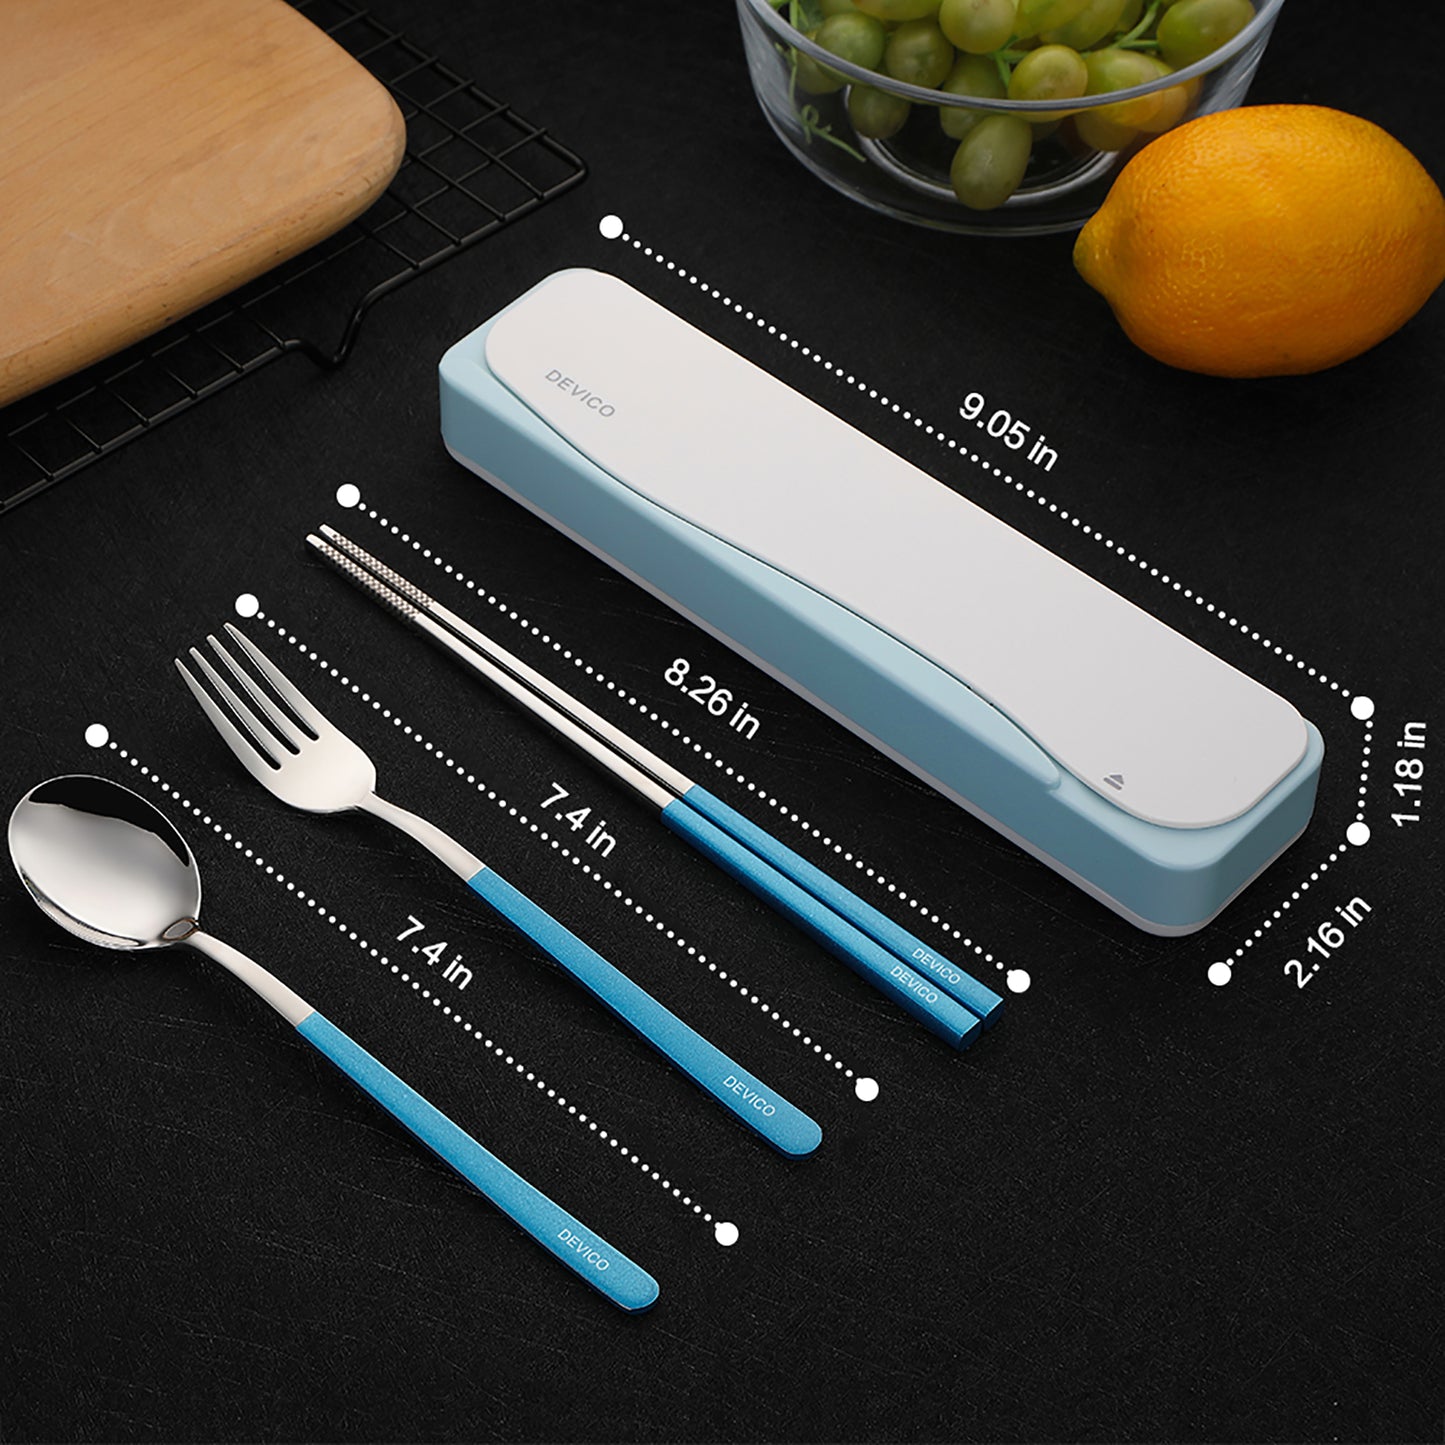 DEVICO Travel Utensils, 18/8 Stainless Steel 4pcs Cutlery Set Portable Camp Reusable Flatware Silverware, Include Fork Spoon Chopsticks with Case (Blue)